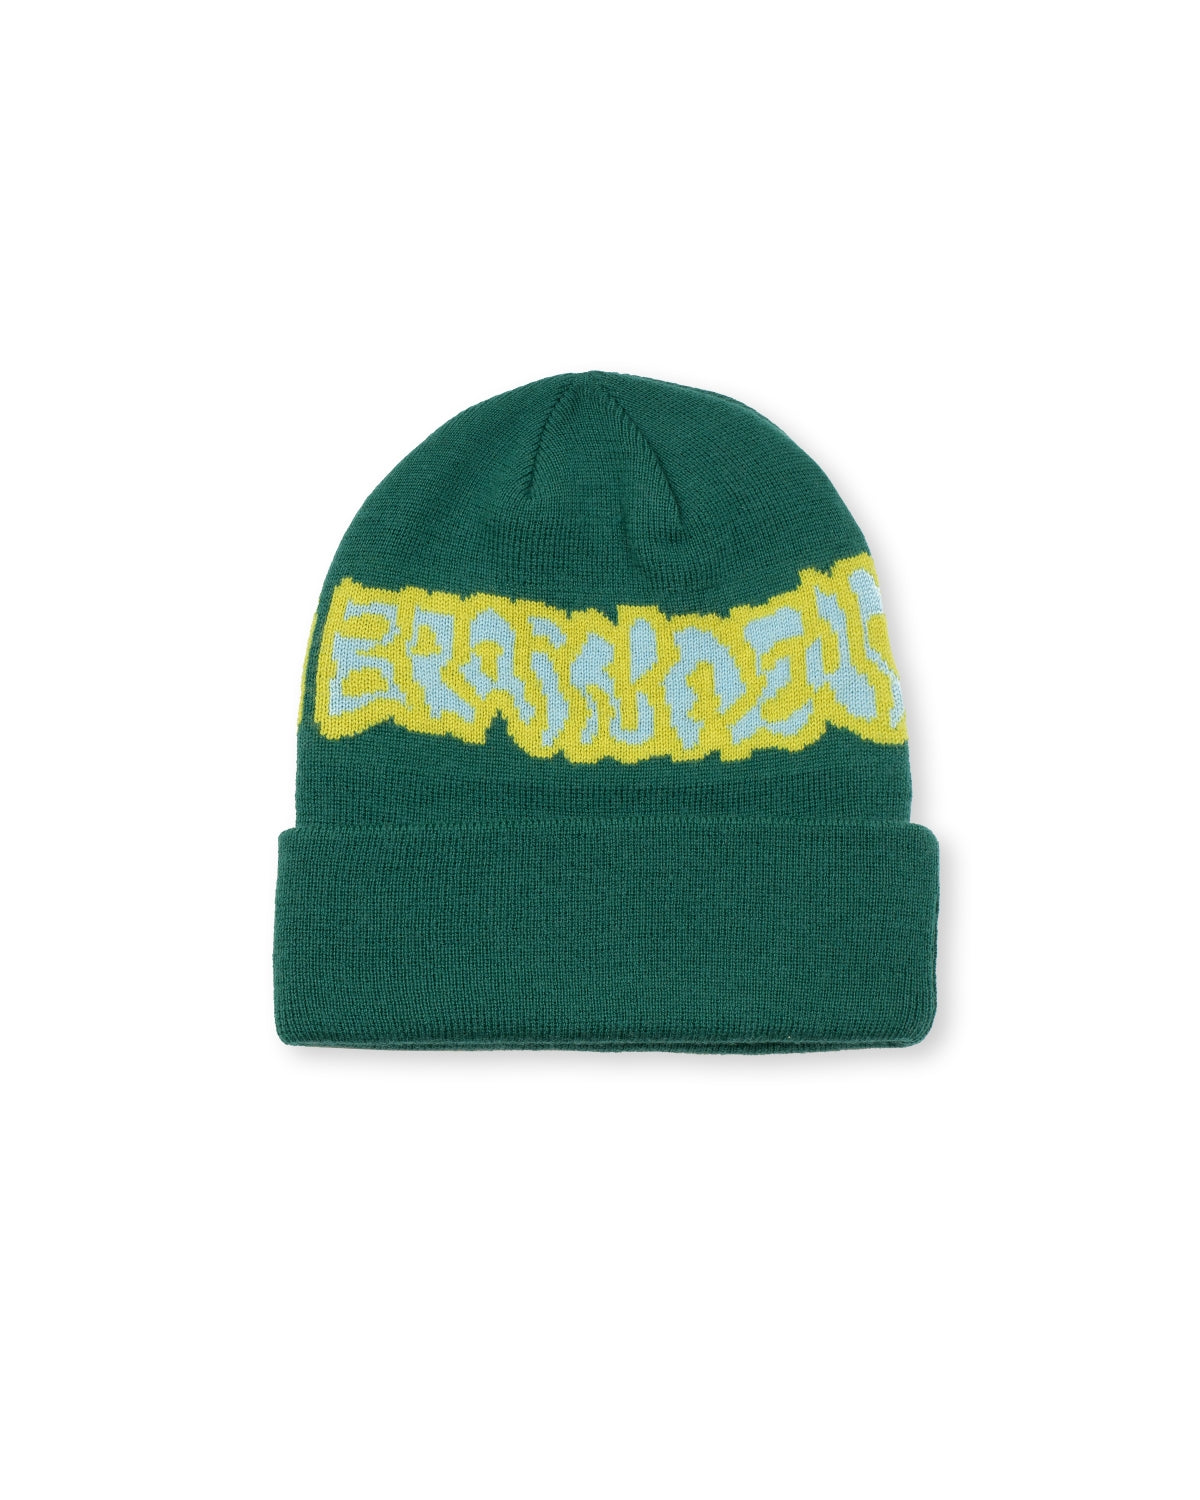 Dystopia Wool Beanie - Forest Green